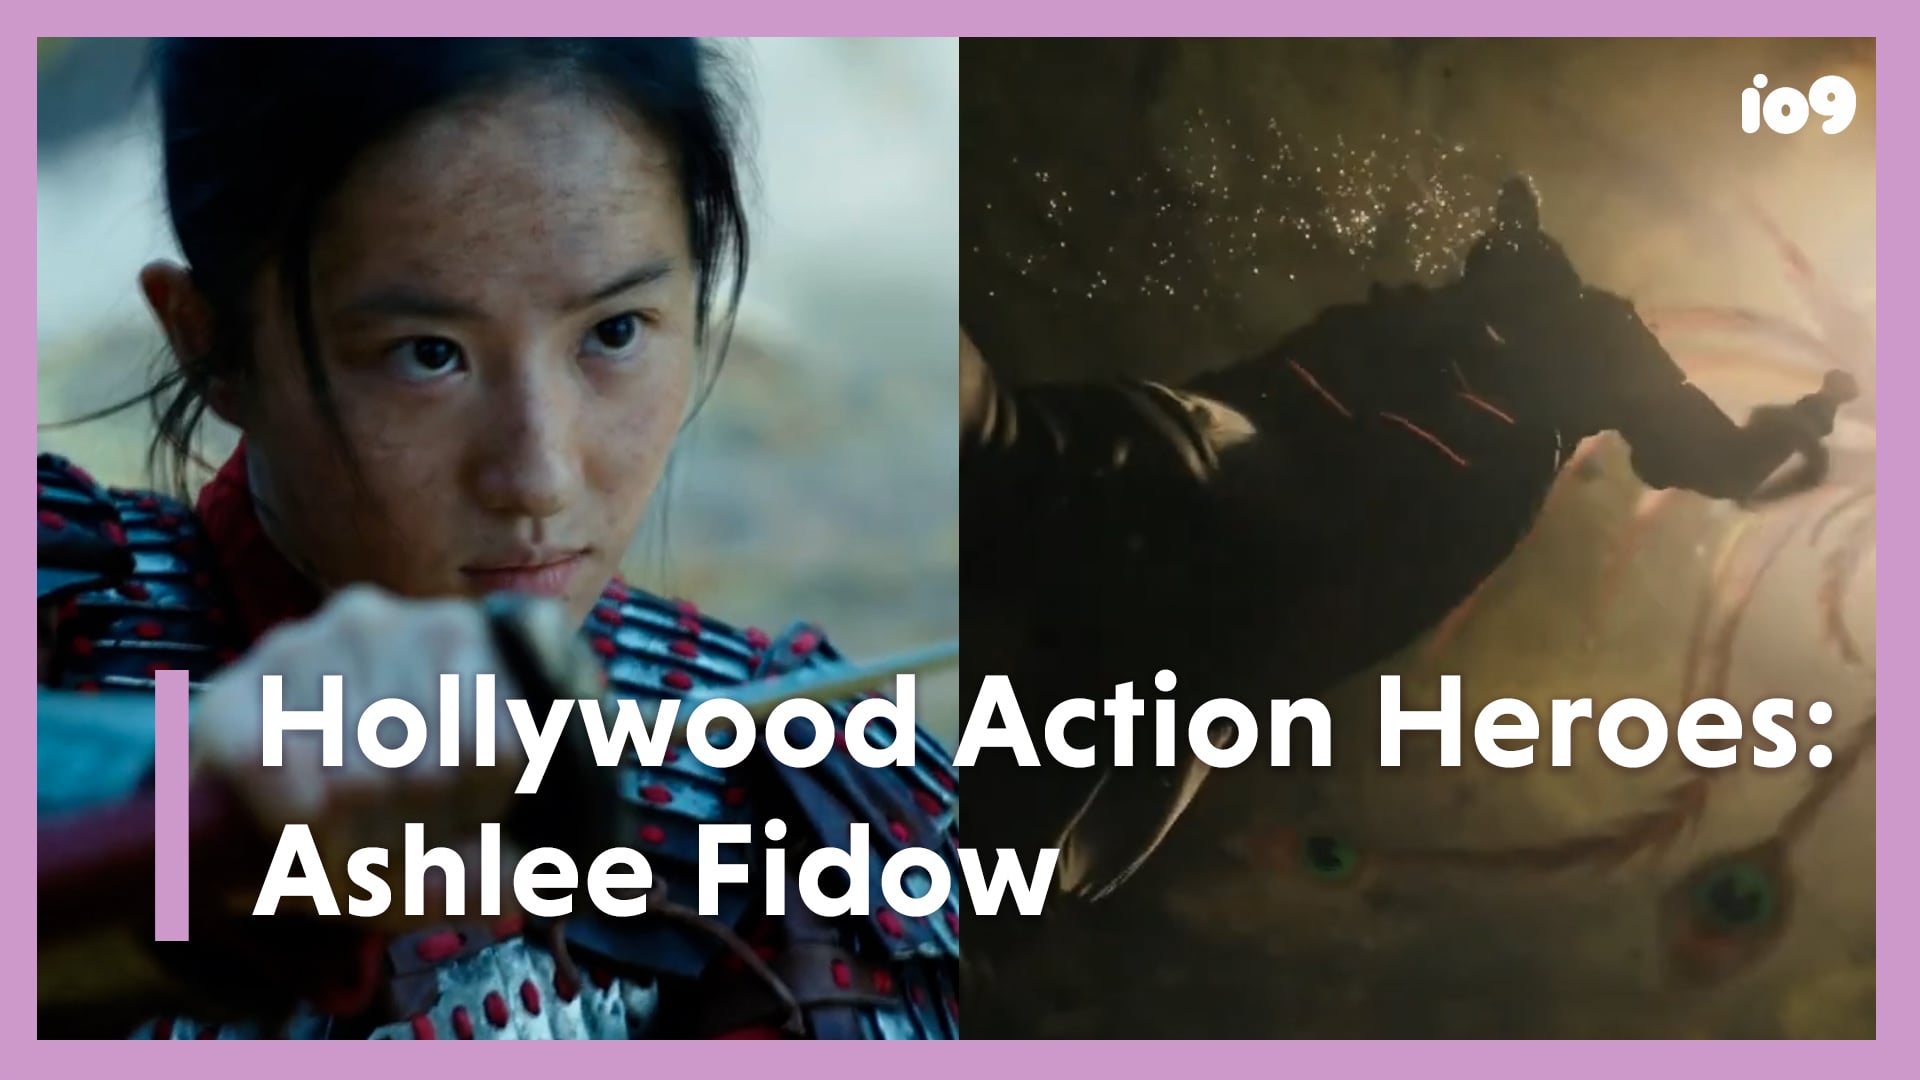 io9: Hollywood Action Heroes: Ashlee Fidow